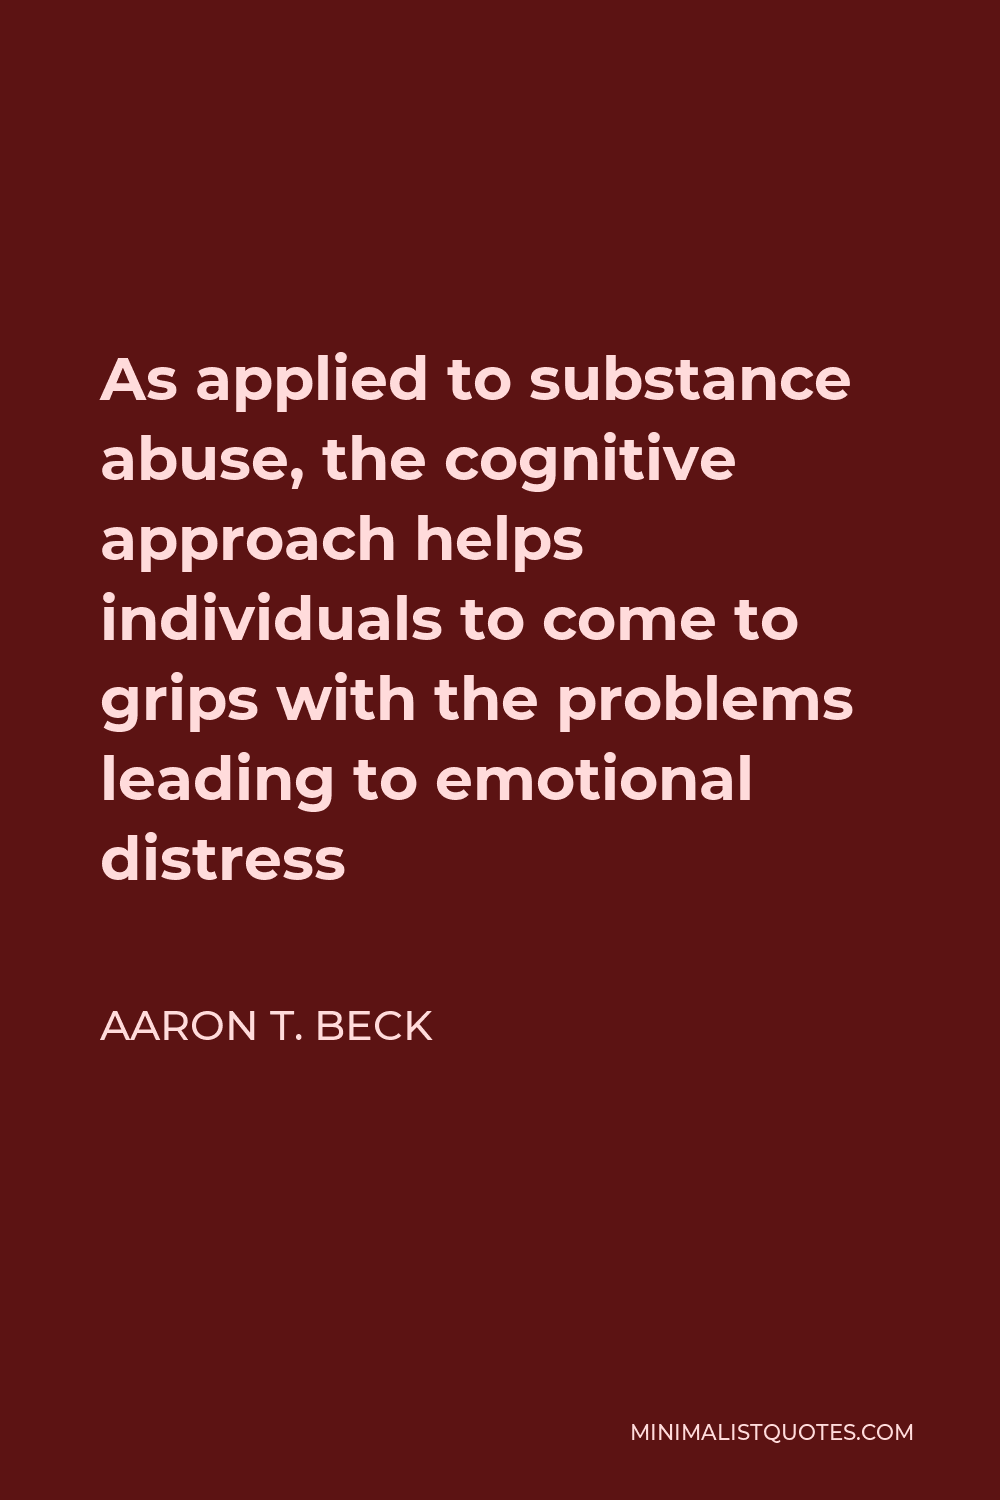 Aaron T. Beck Quote - As applied to substance abuse, the cognitive approach helps individuals to come to grips with the problems leading to emotional distress